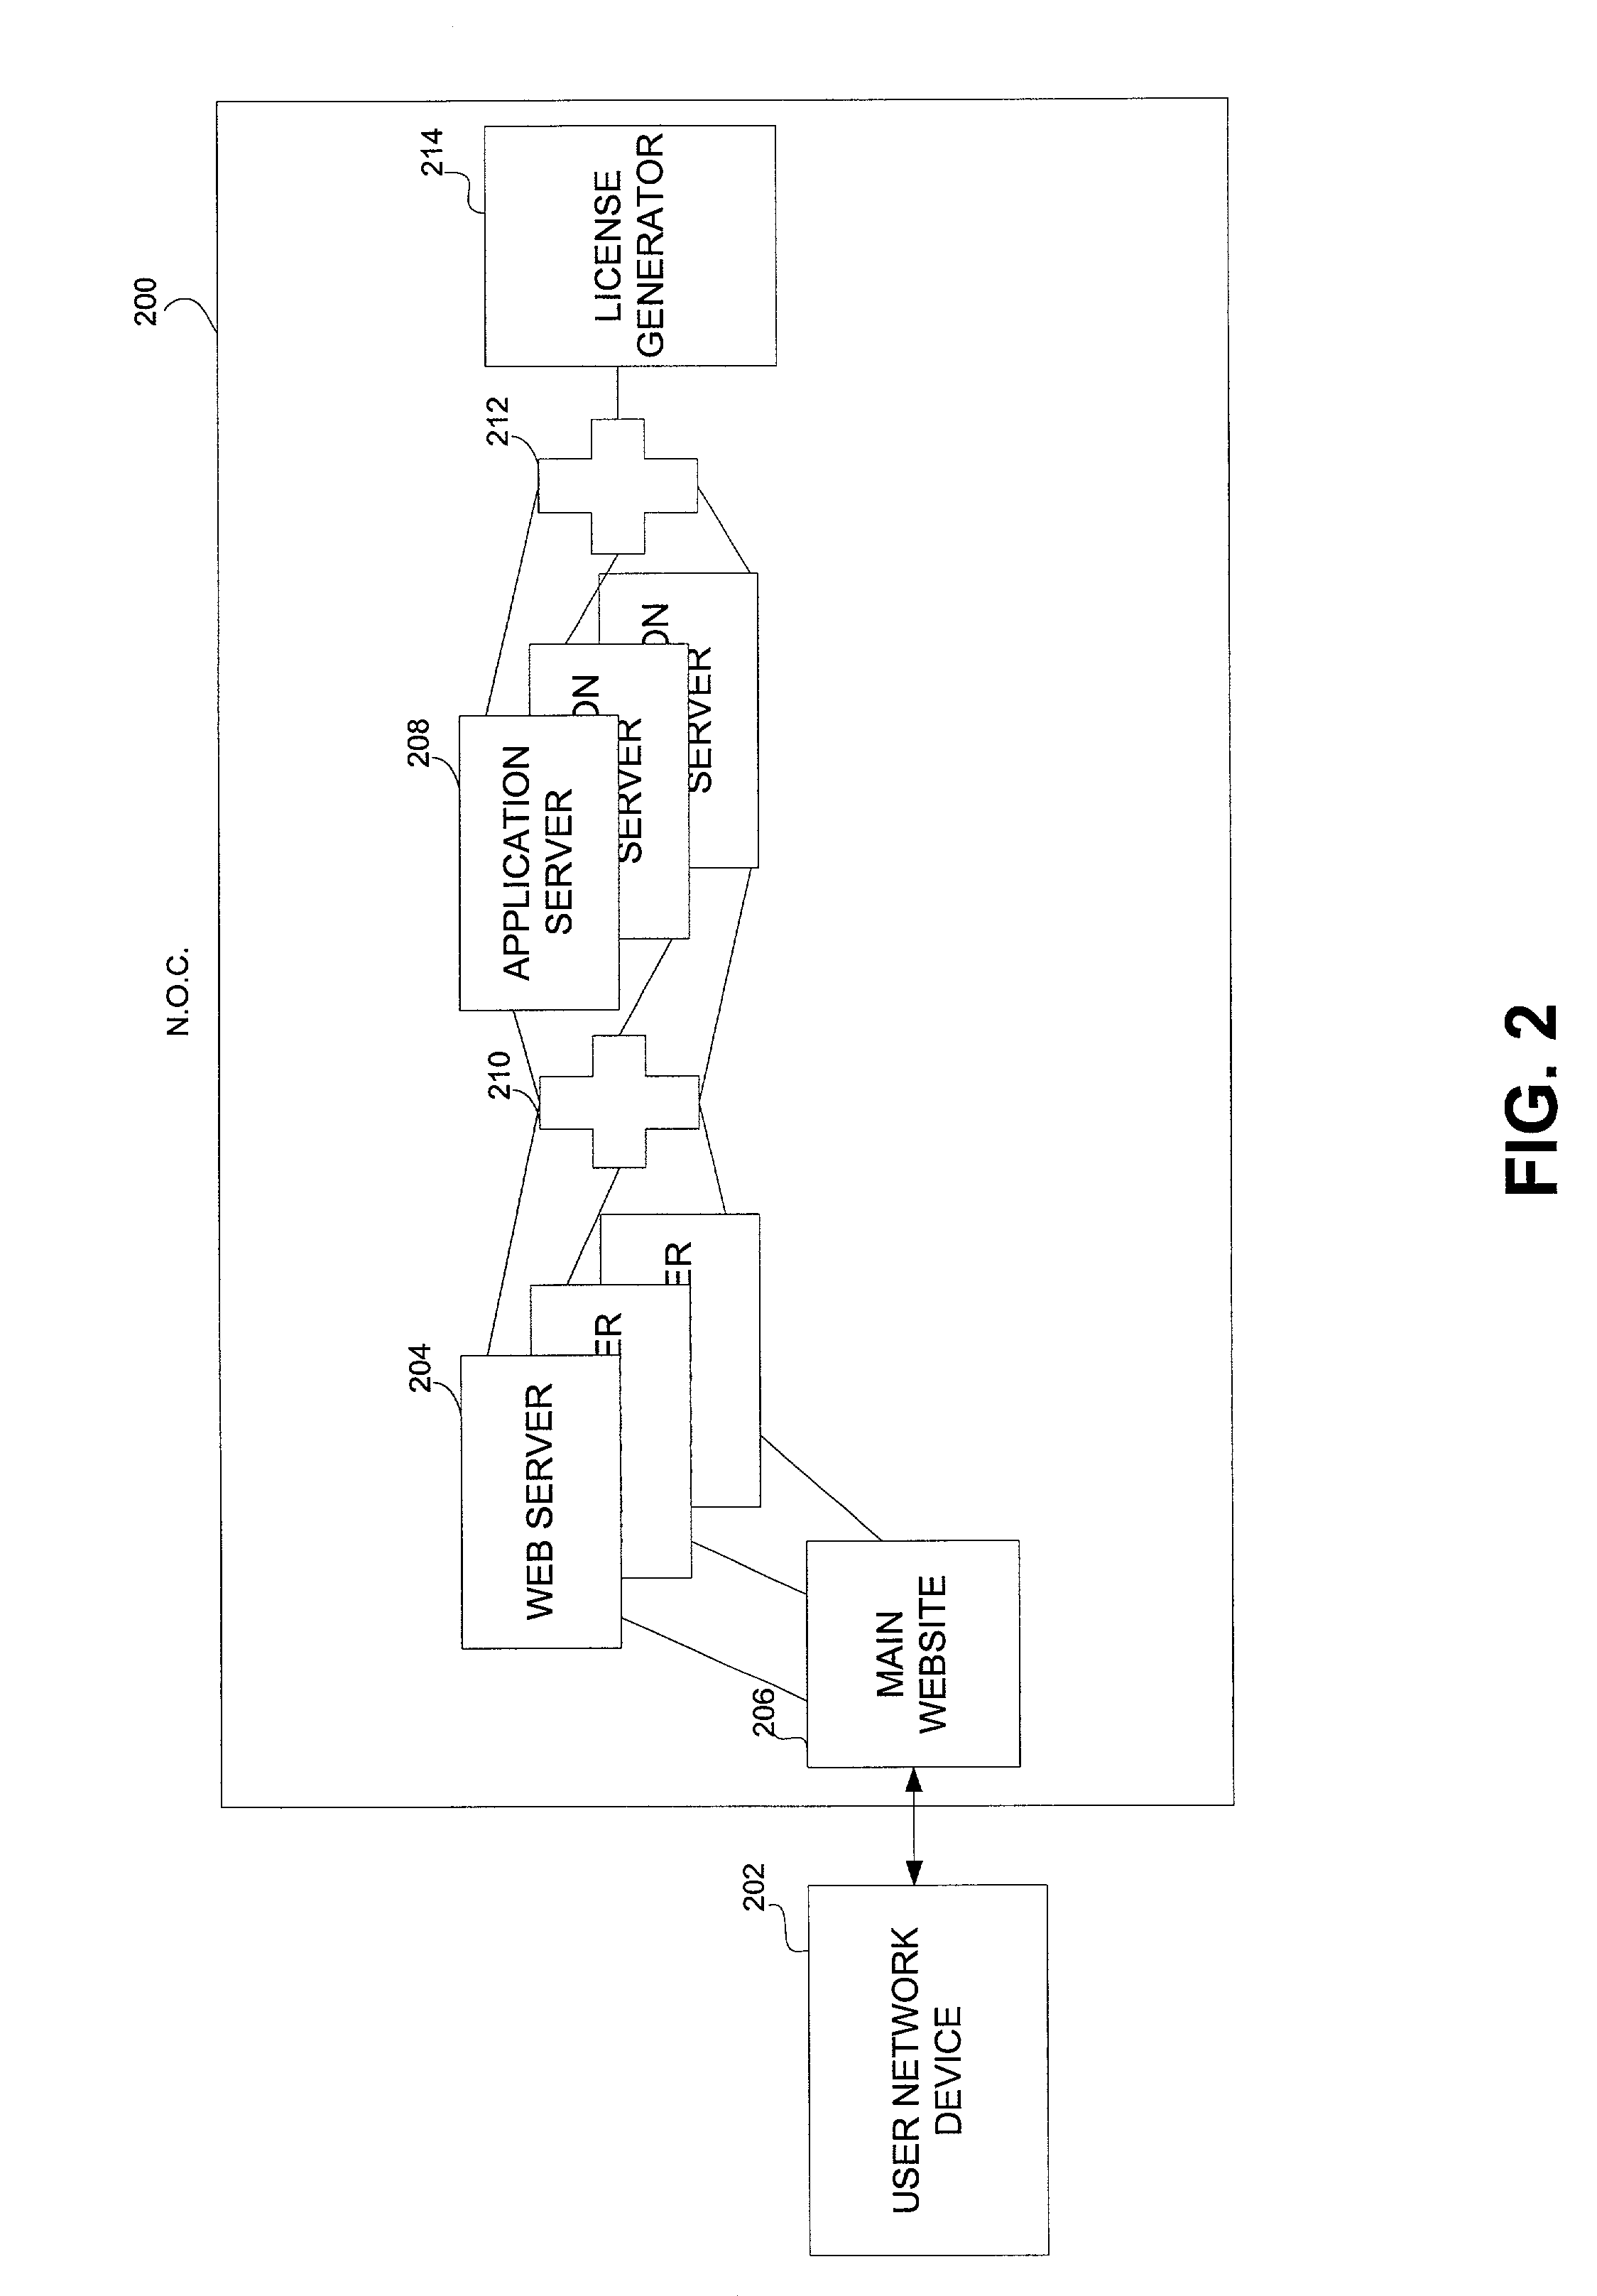 Secure digital content licensing system and method